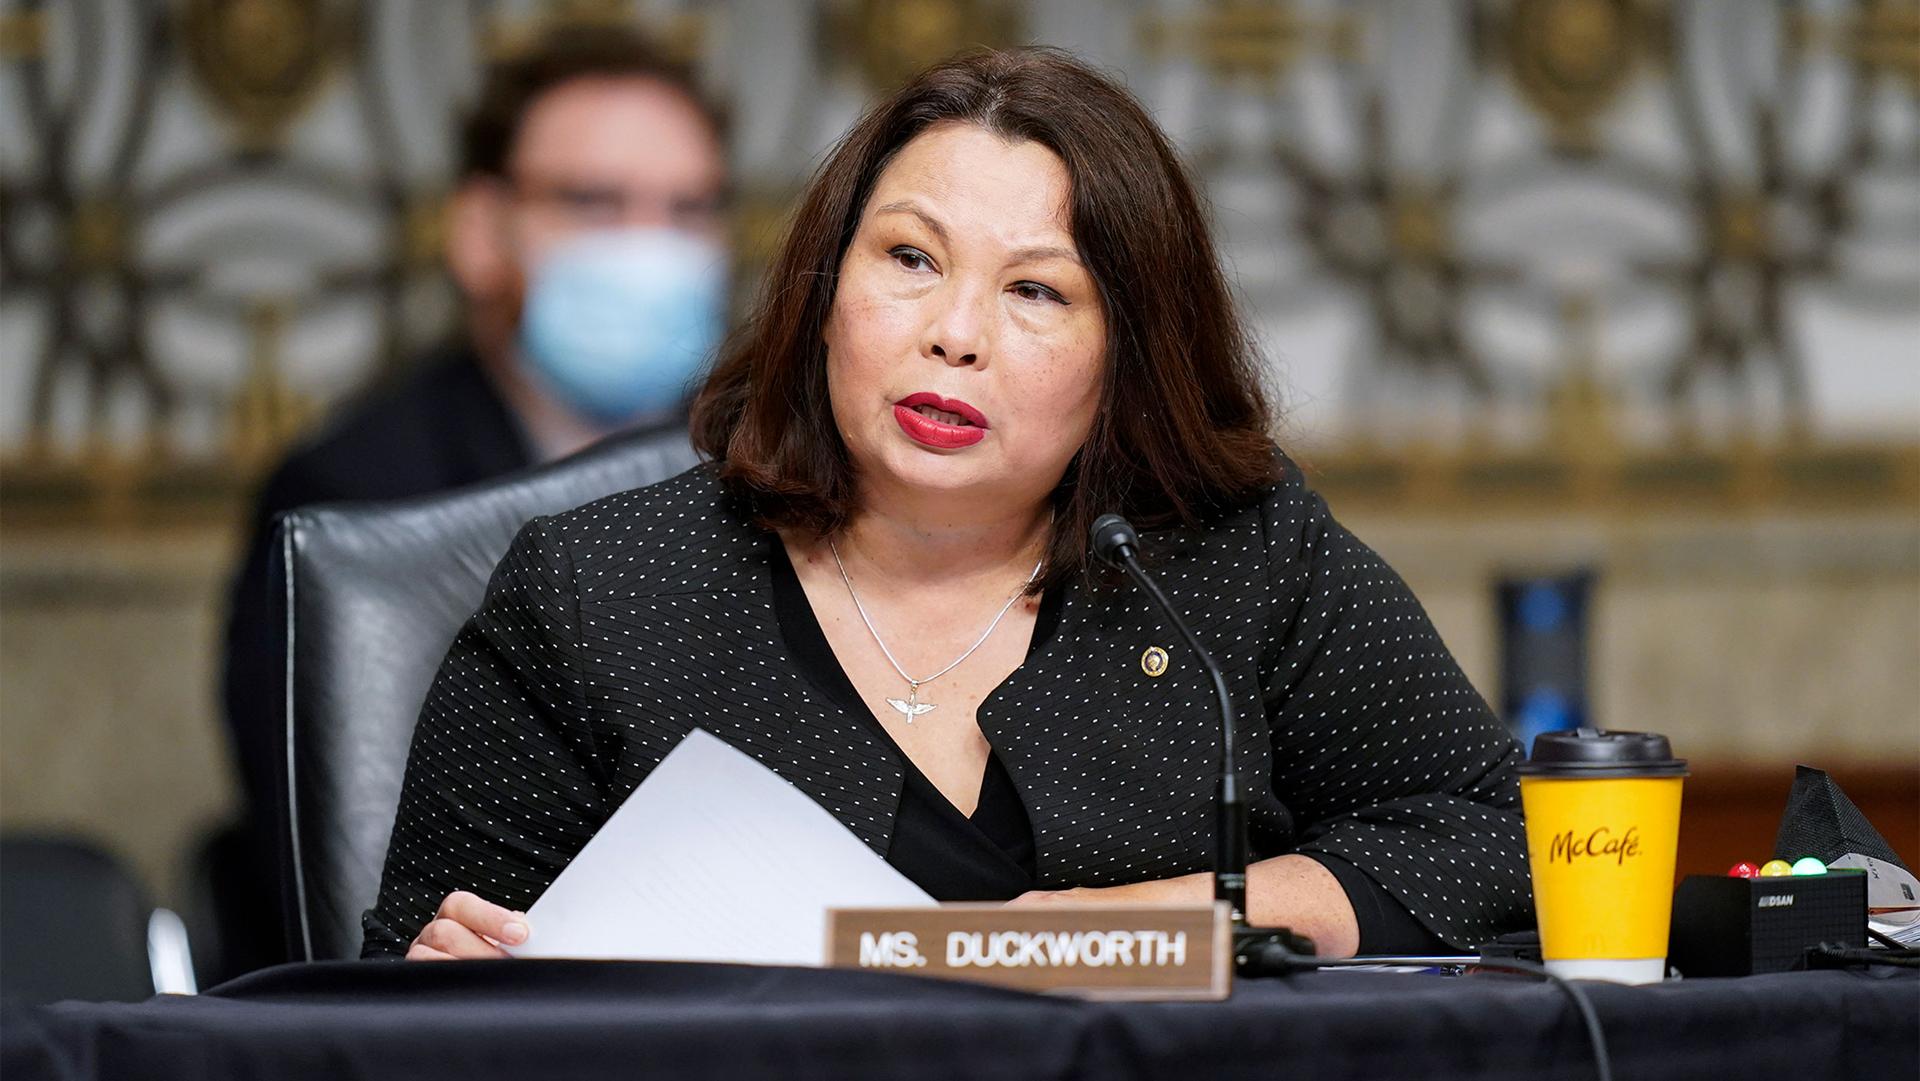 Democratic Senator Tammy Duckworth, from Illinois, speaks during a Senate Armed Services Committee hearing on the conclusion of military operations in Afghanistan and plans for future counterterrorism operations on Capitol Hill in Washington